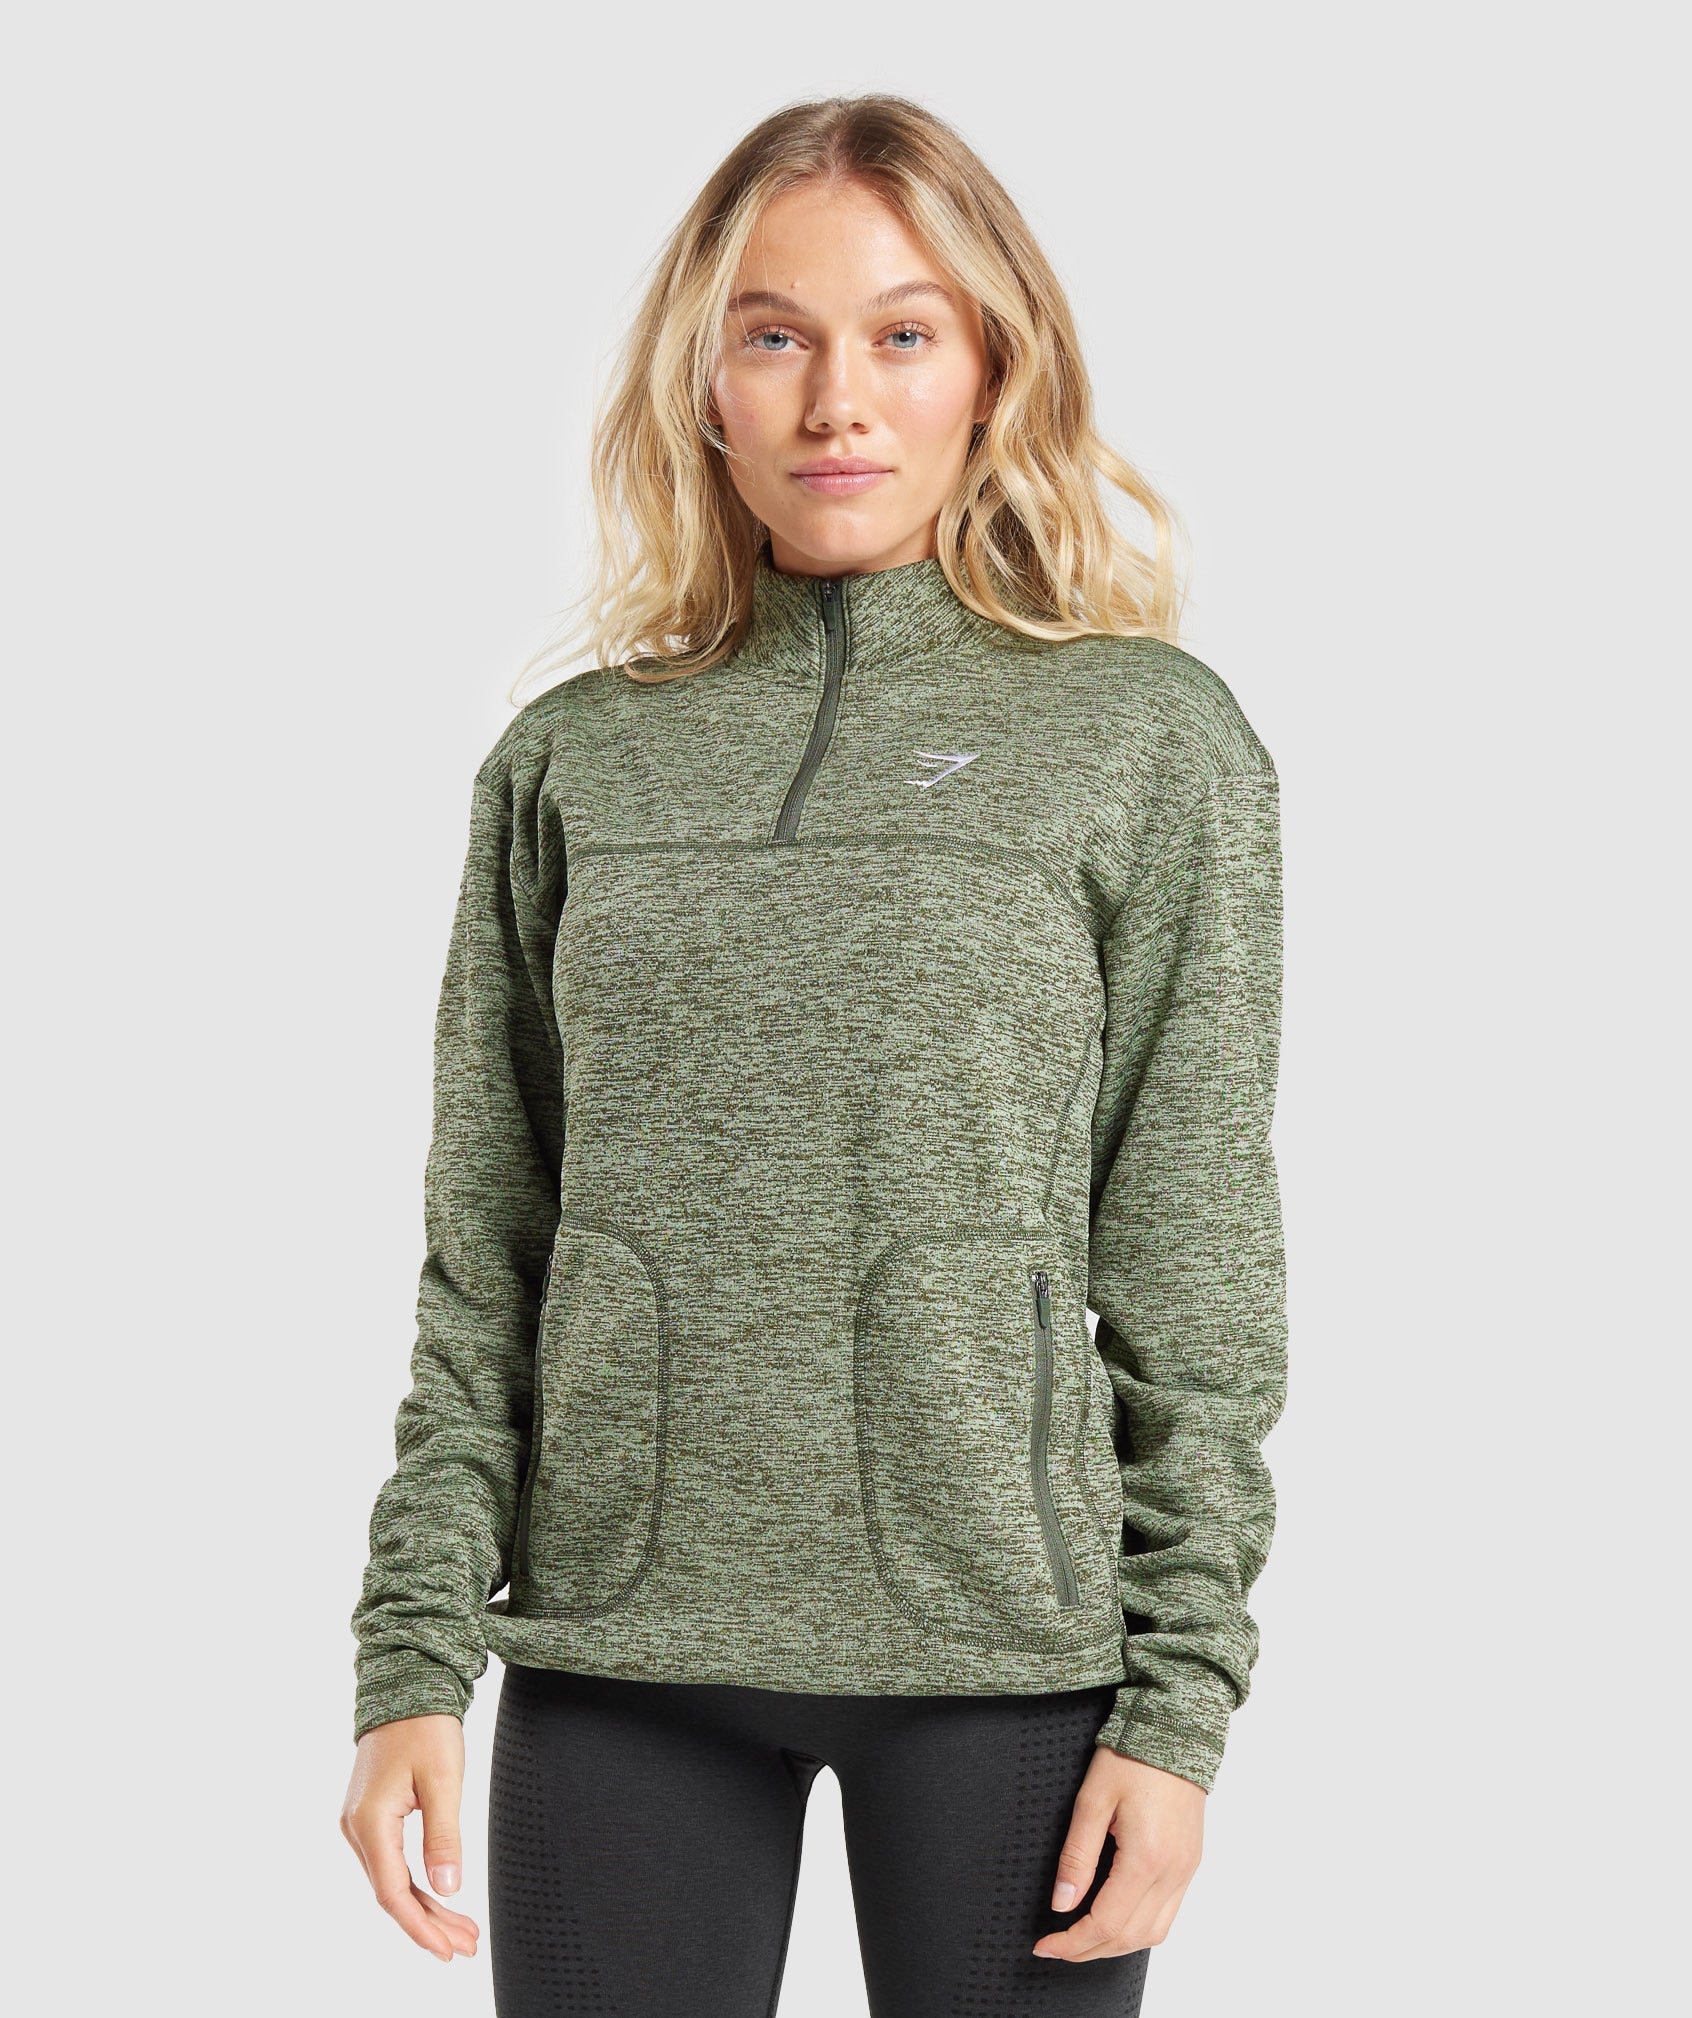 Thermal Fleece 1/4 Zip Pullover in Winter Olive/Light Sage Green - view 1